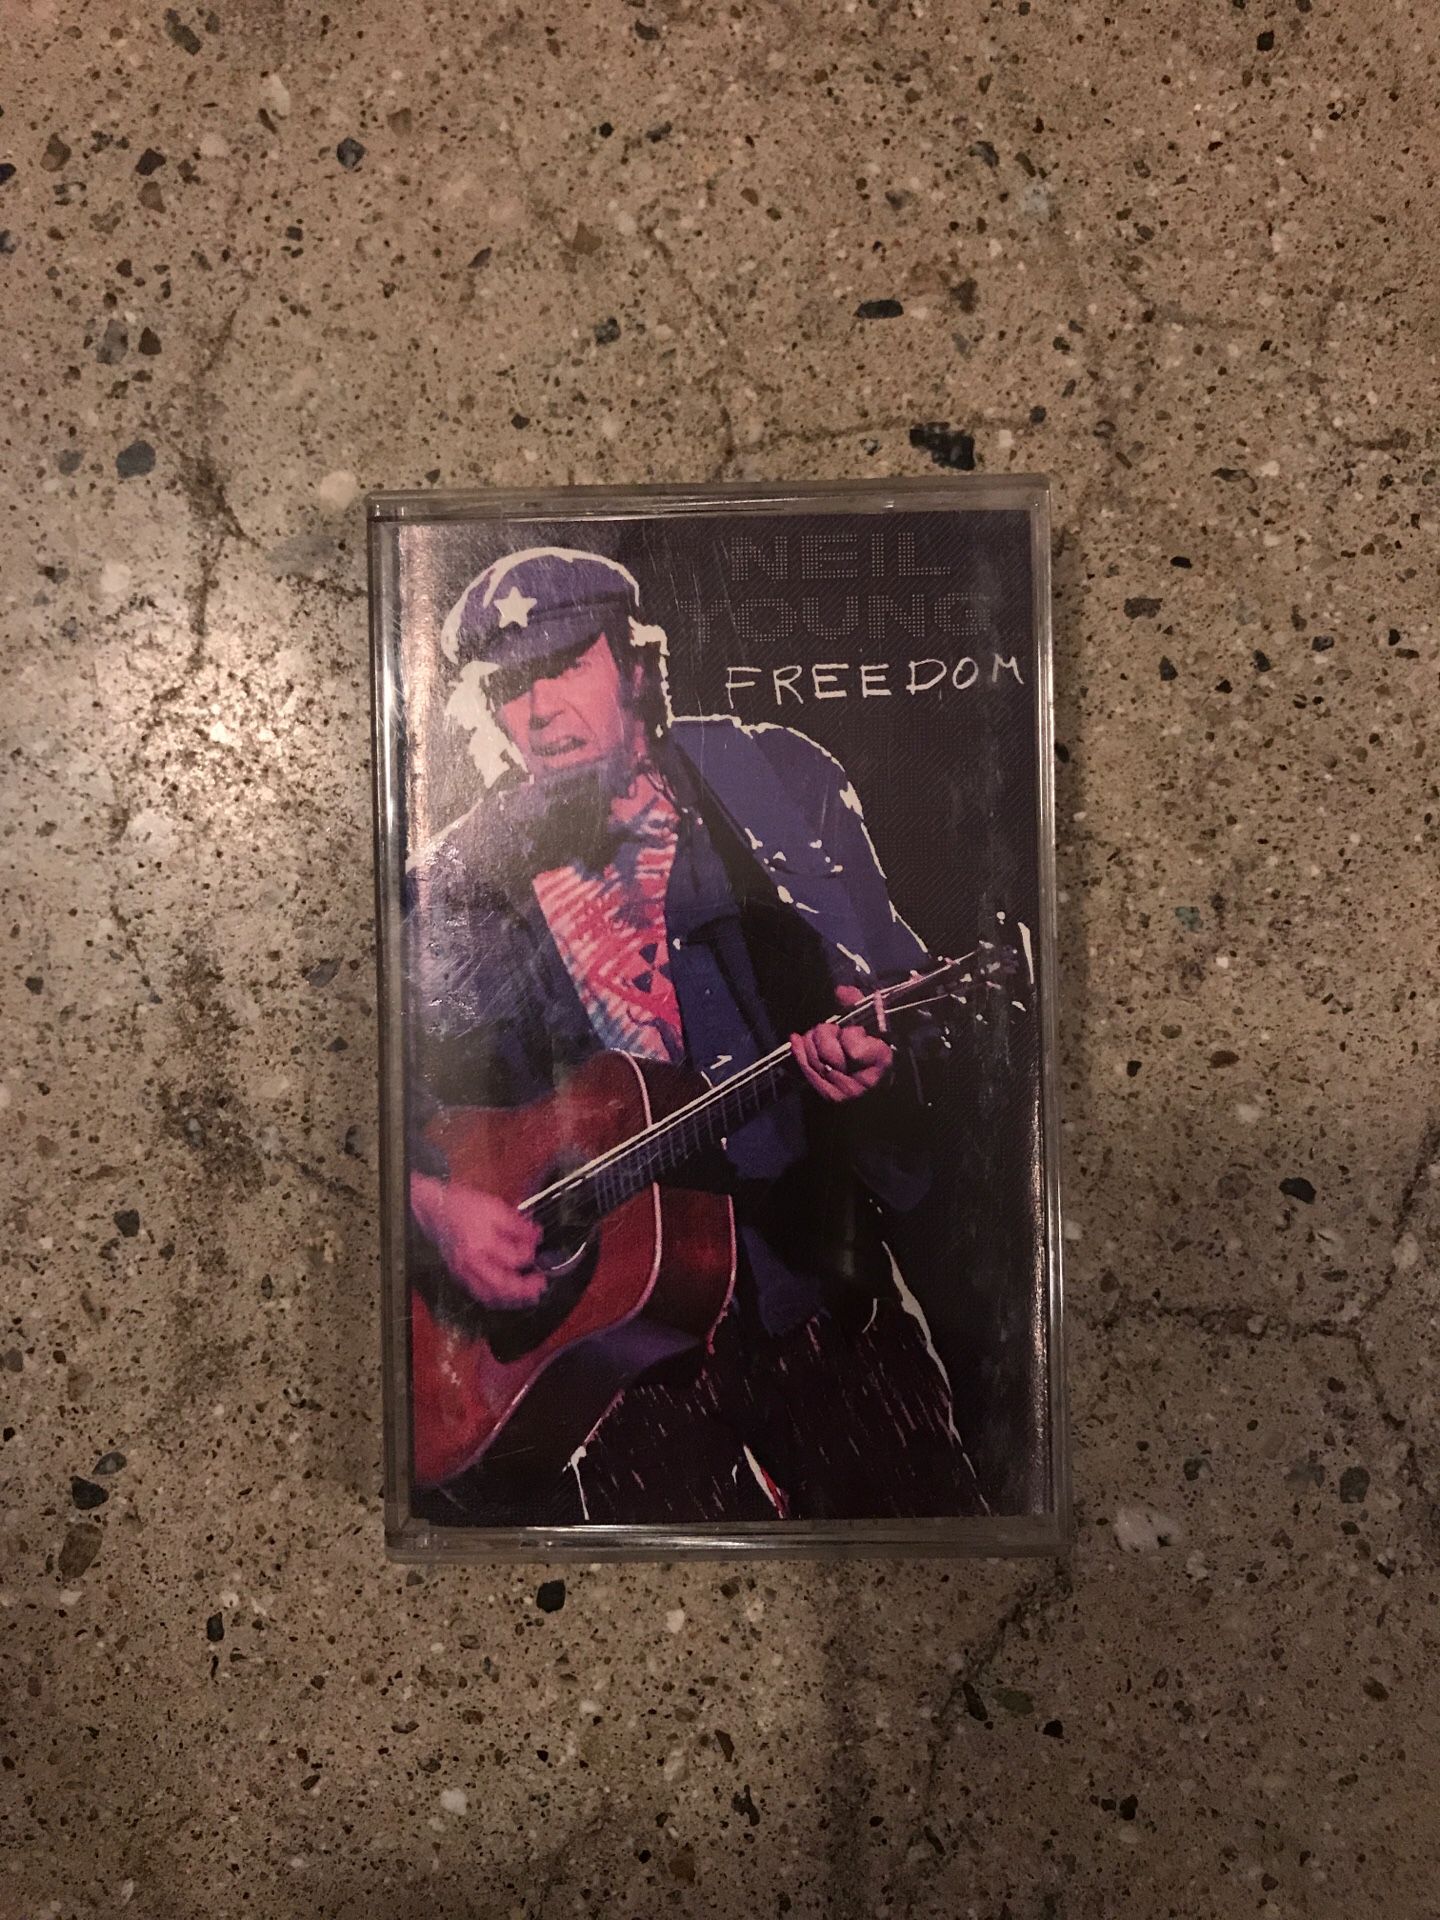 NEIL YOUNG FREEDOM CASSETTE TAPE